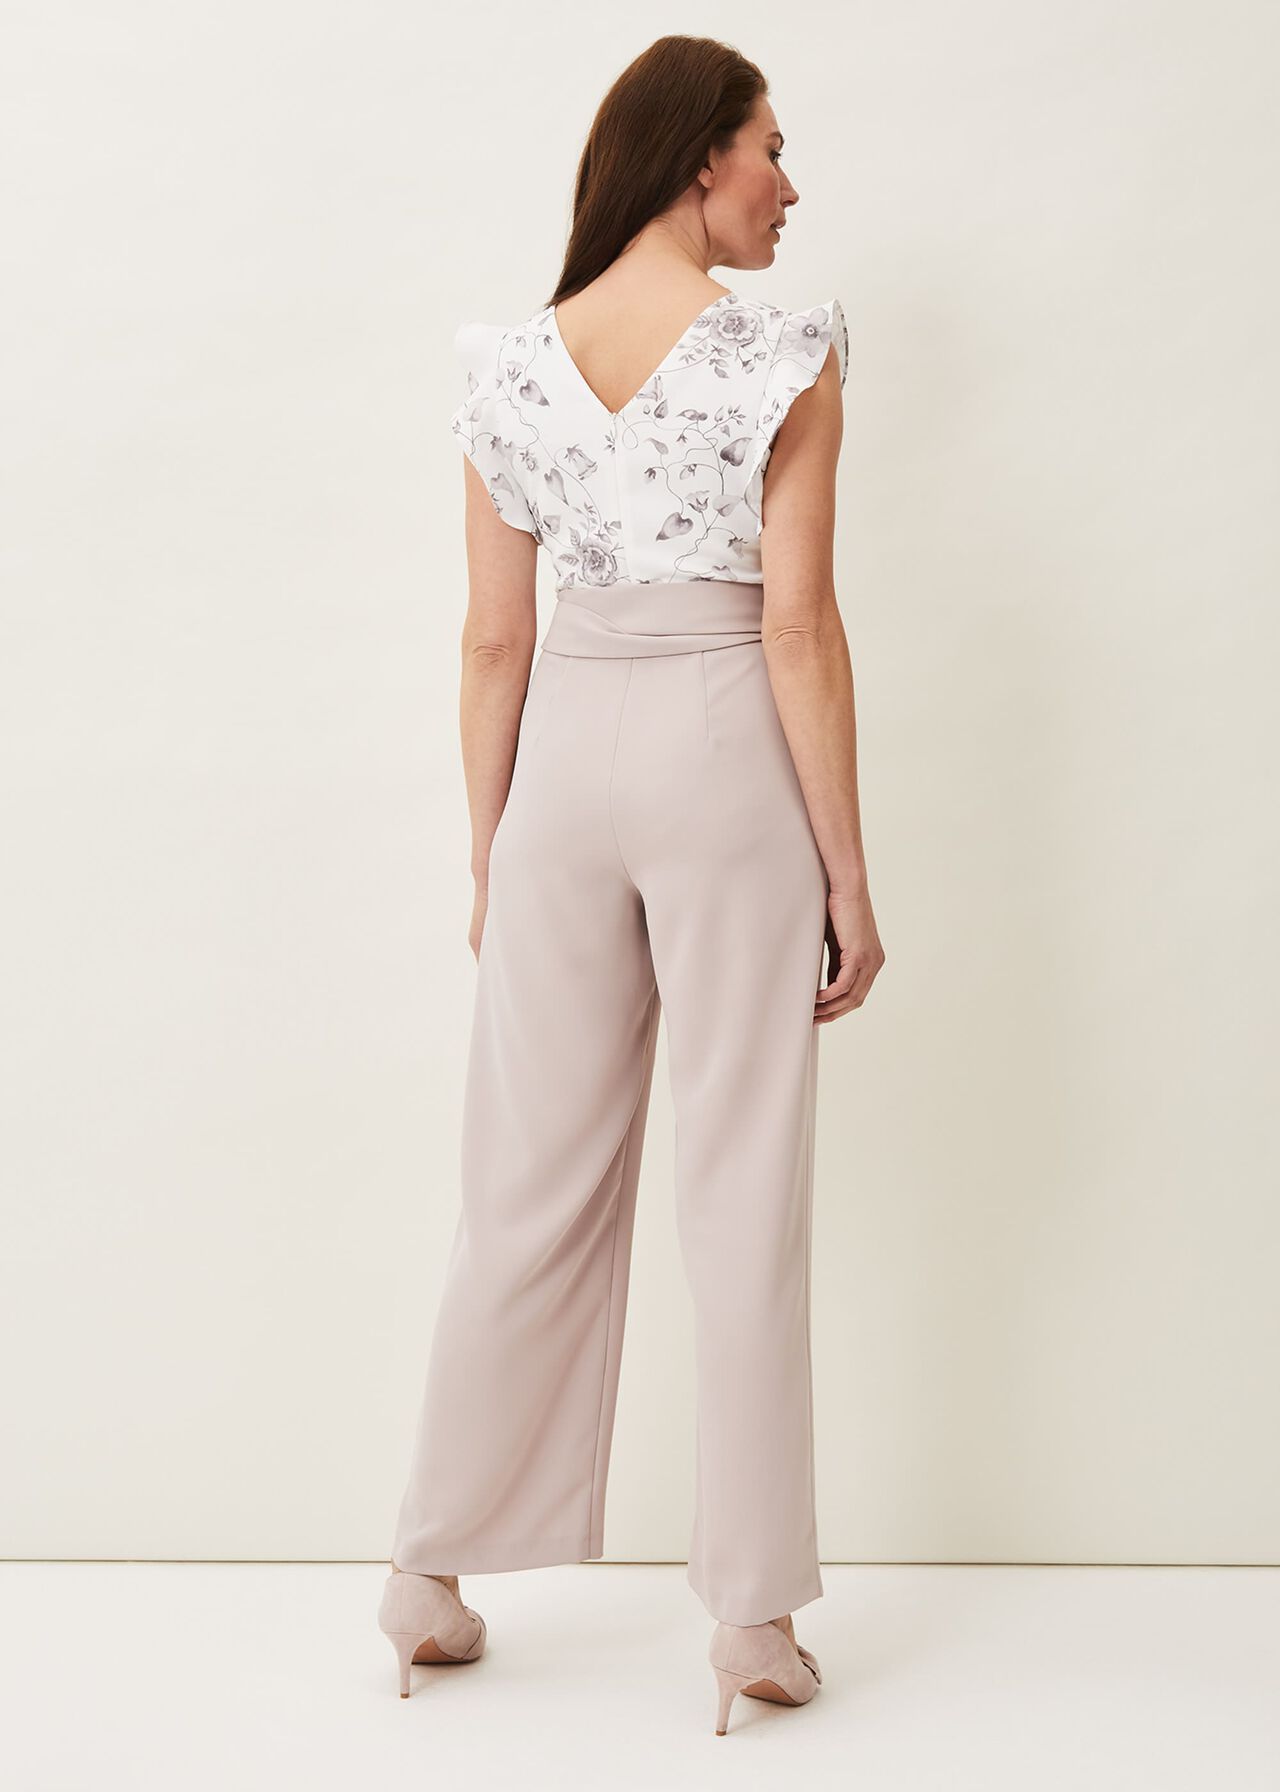 Victoriana Printed Jumpsuit | Phase Eight